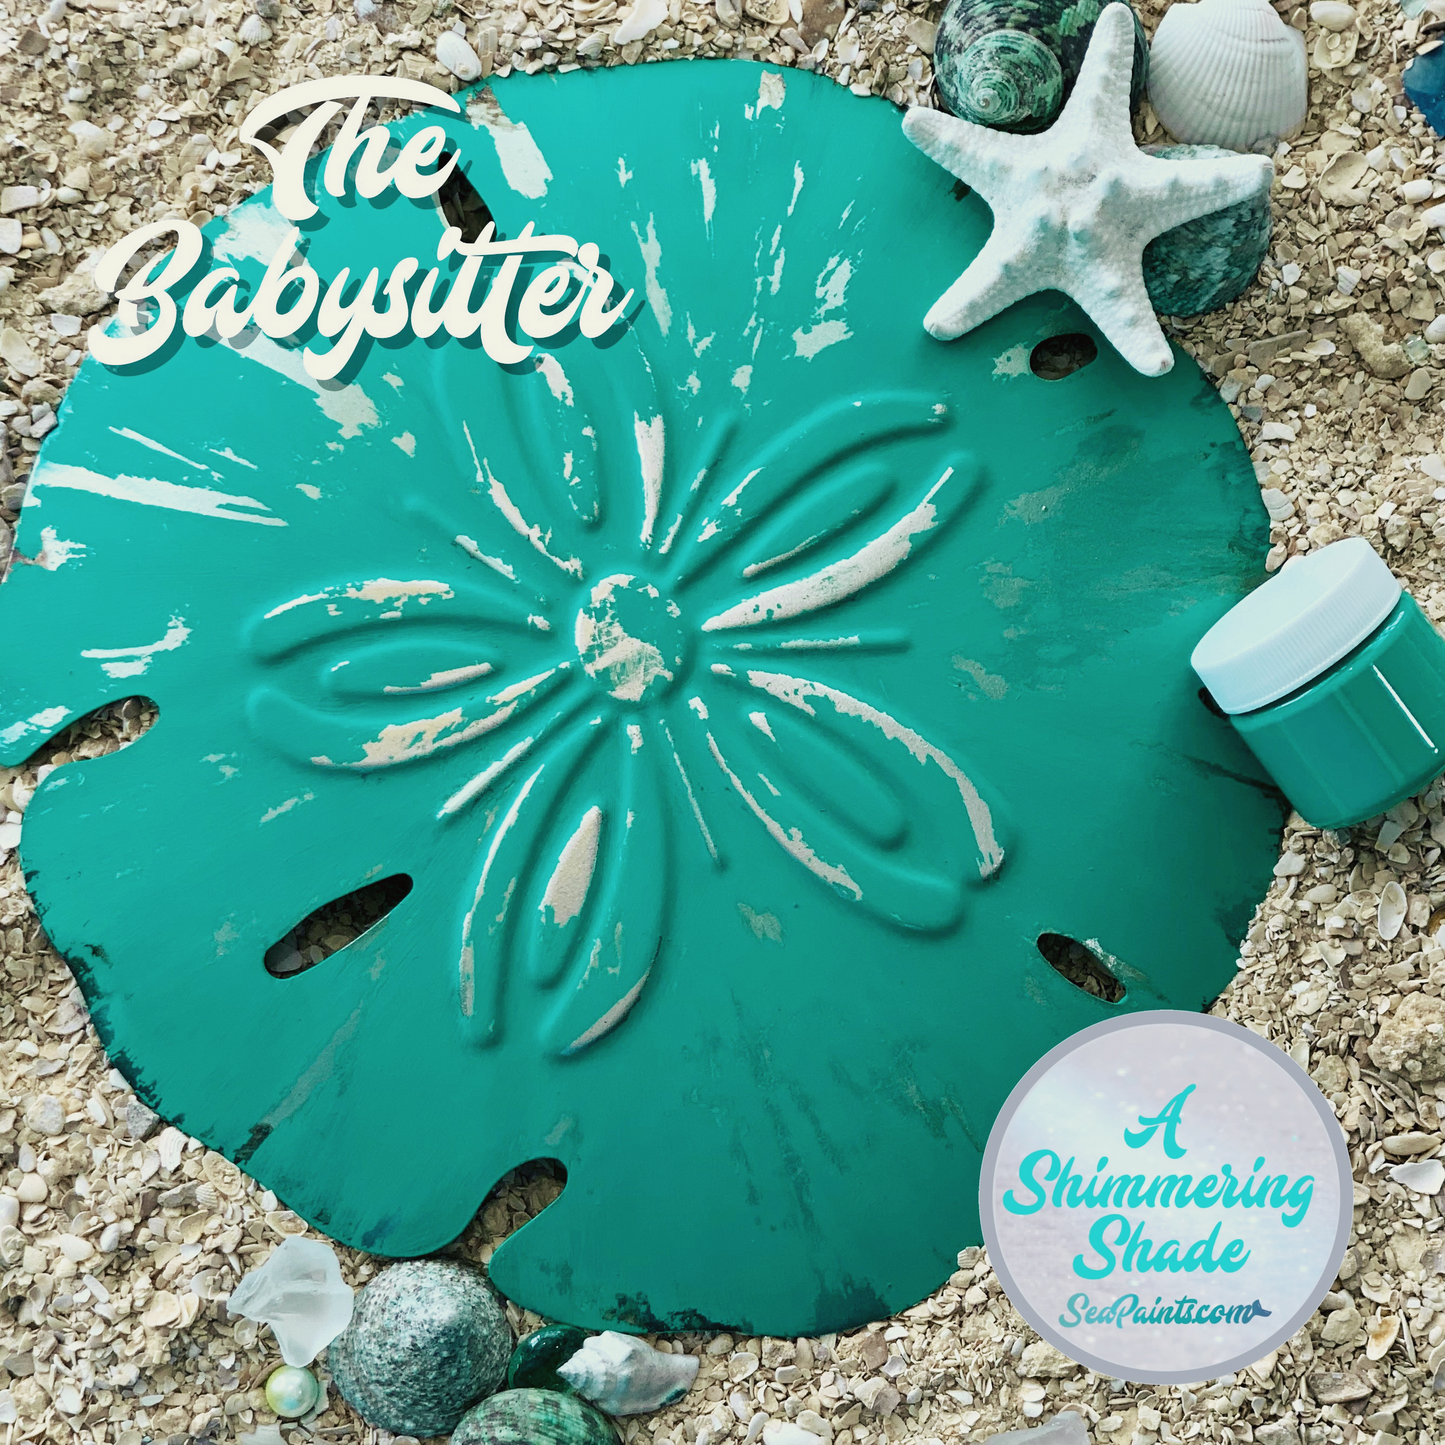 The Babysitter 🐚 Limited Edition